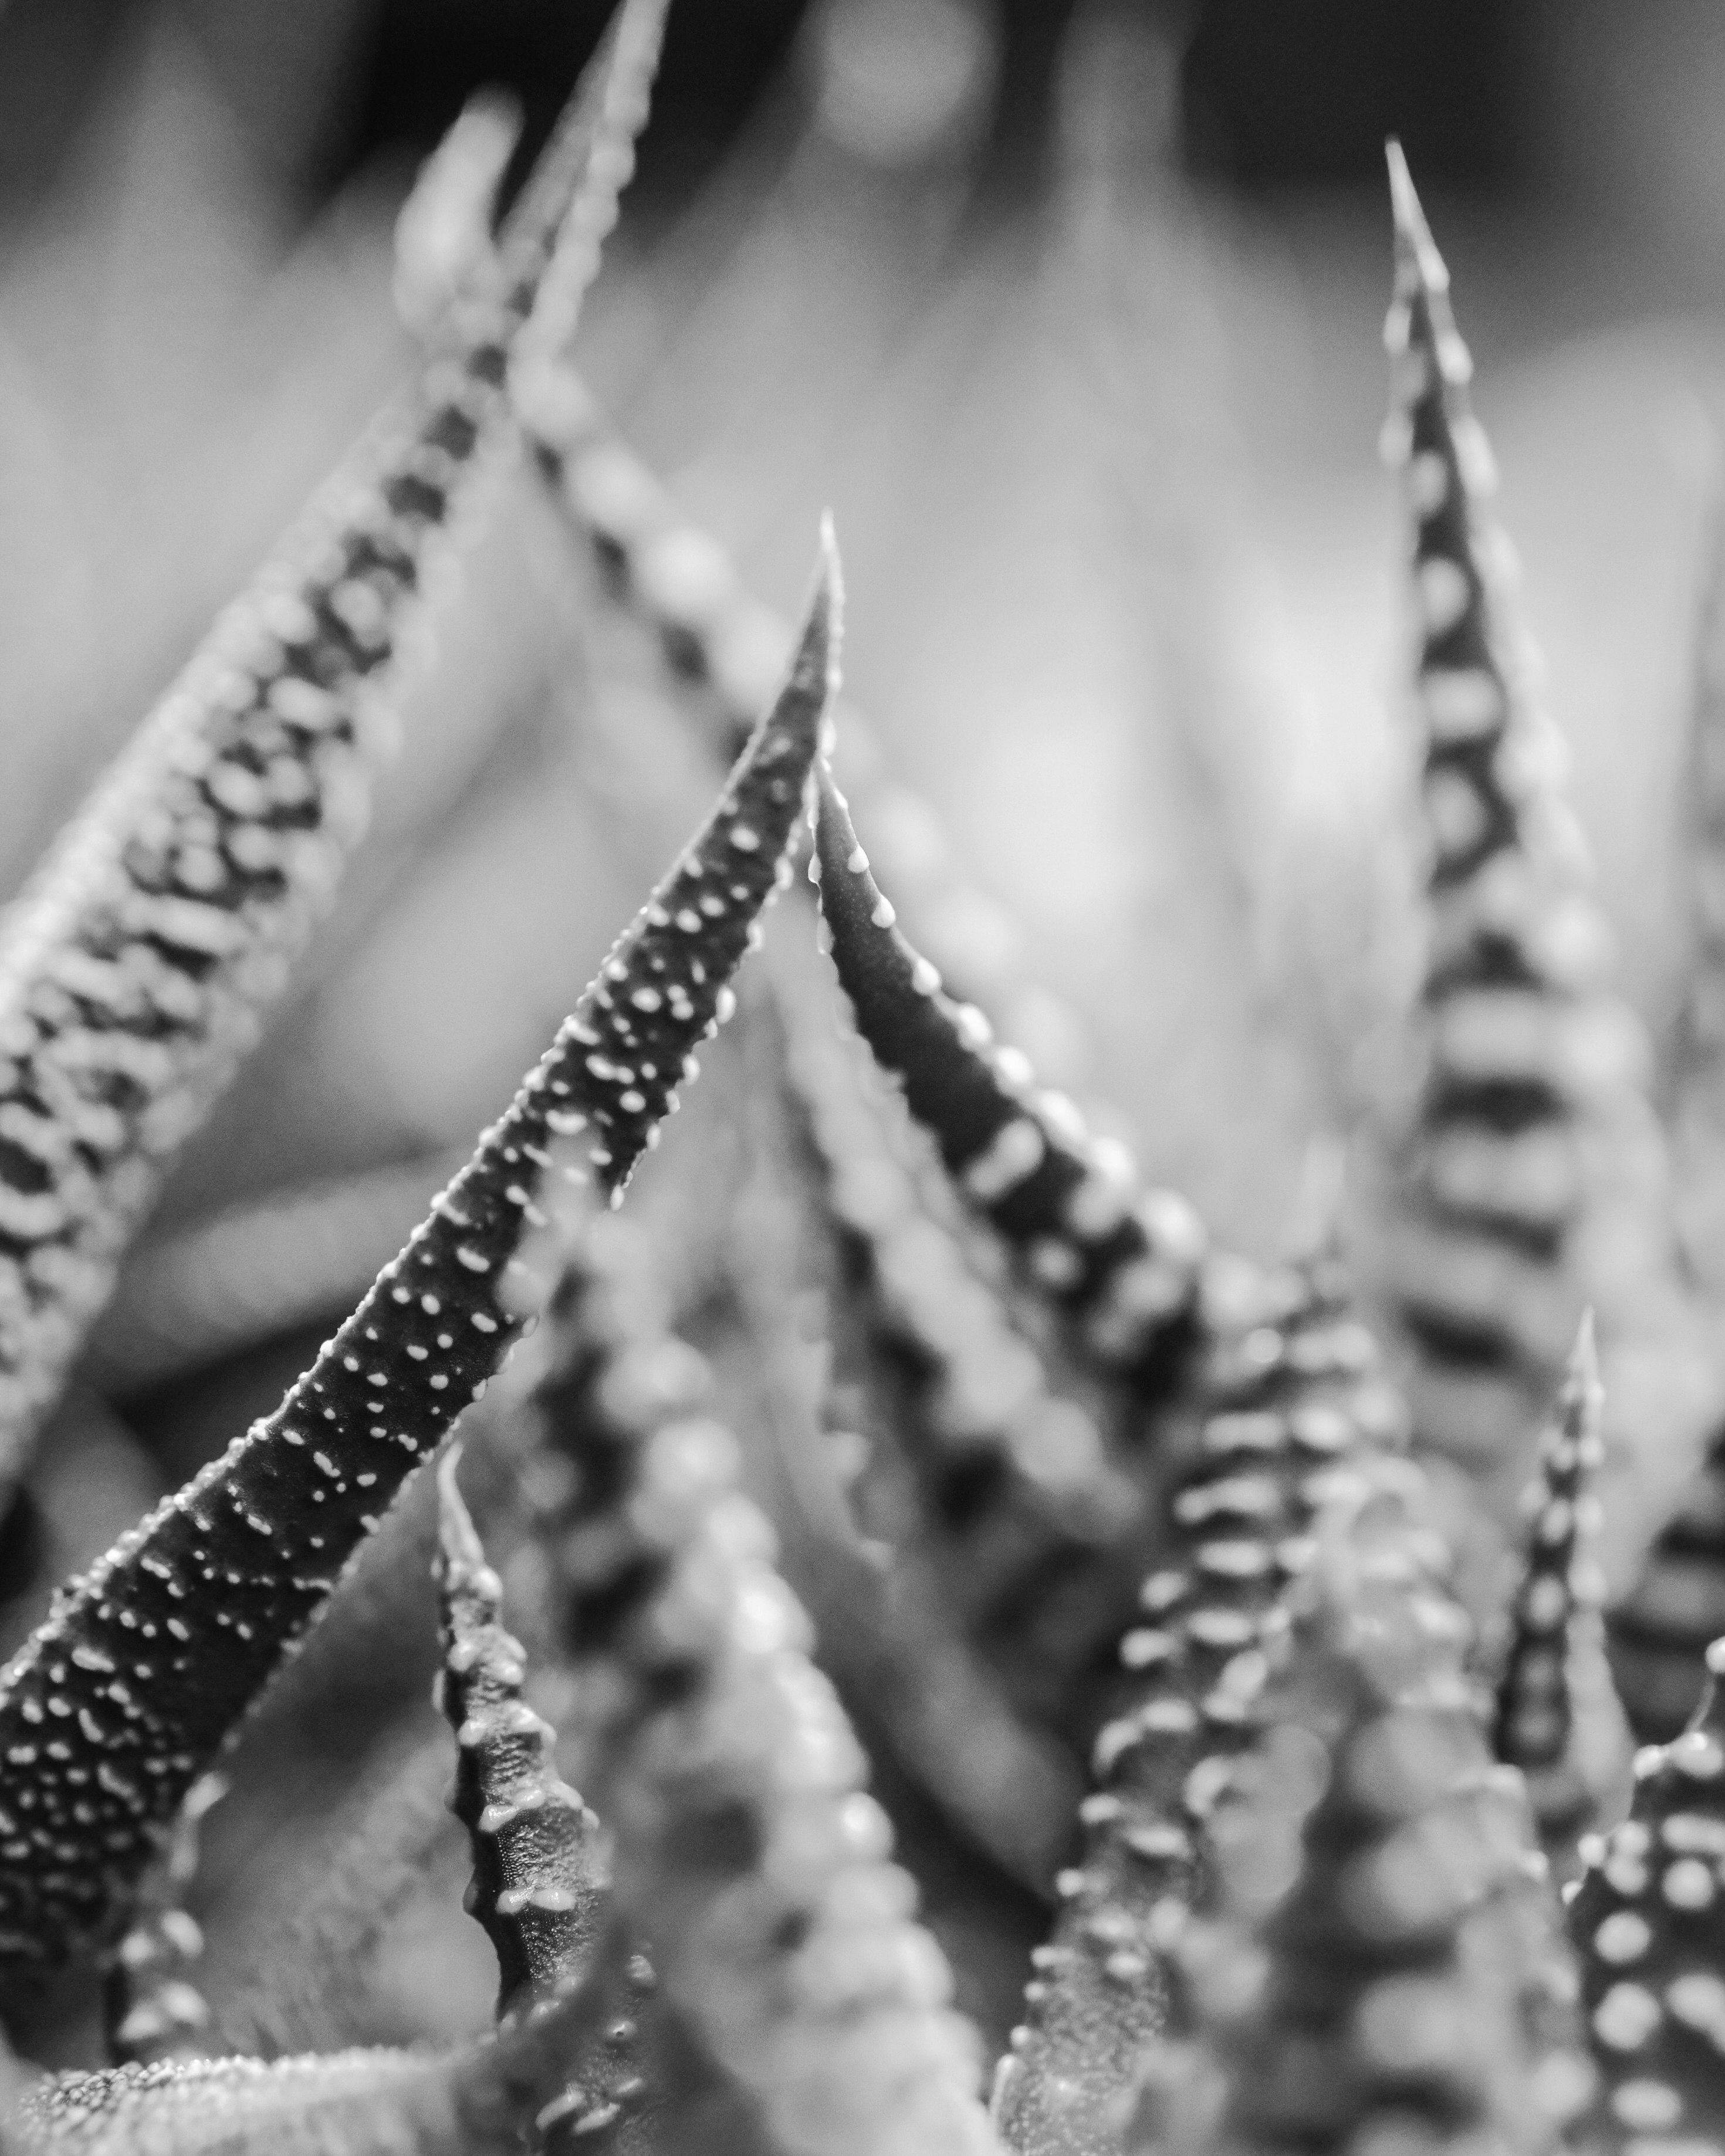 grayscale photo of plant stem